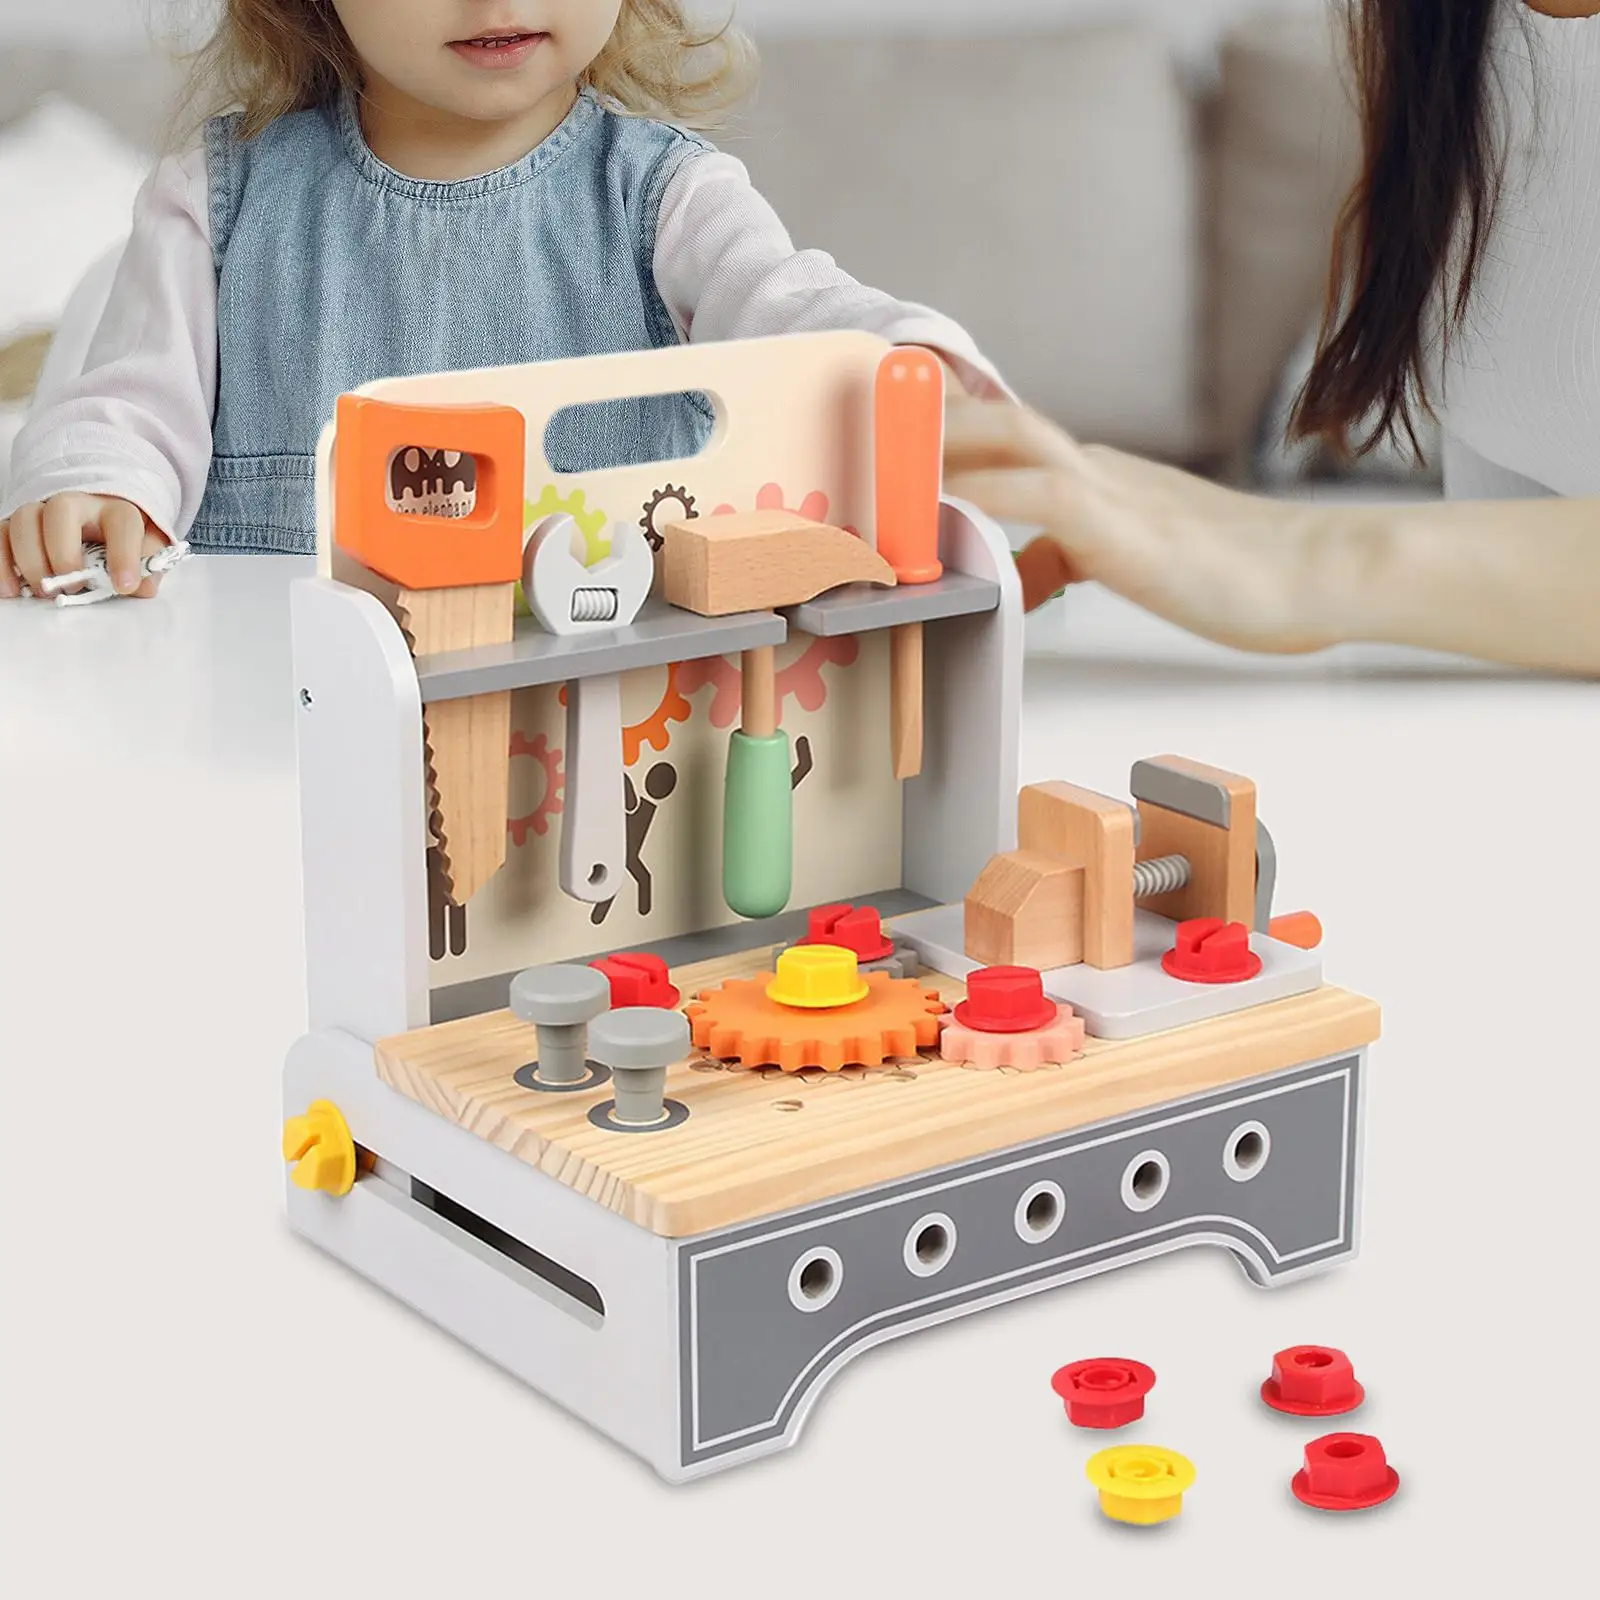 Repair Tool Pretend Play Educational Toys Toy for Indoor Children